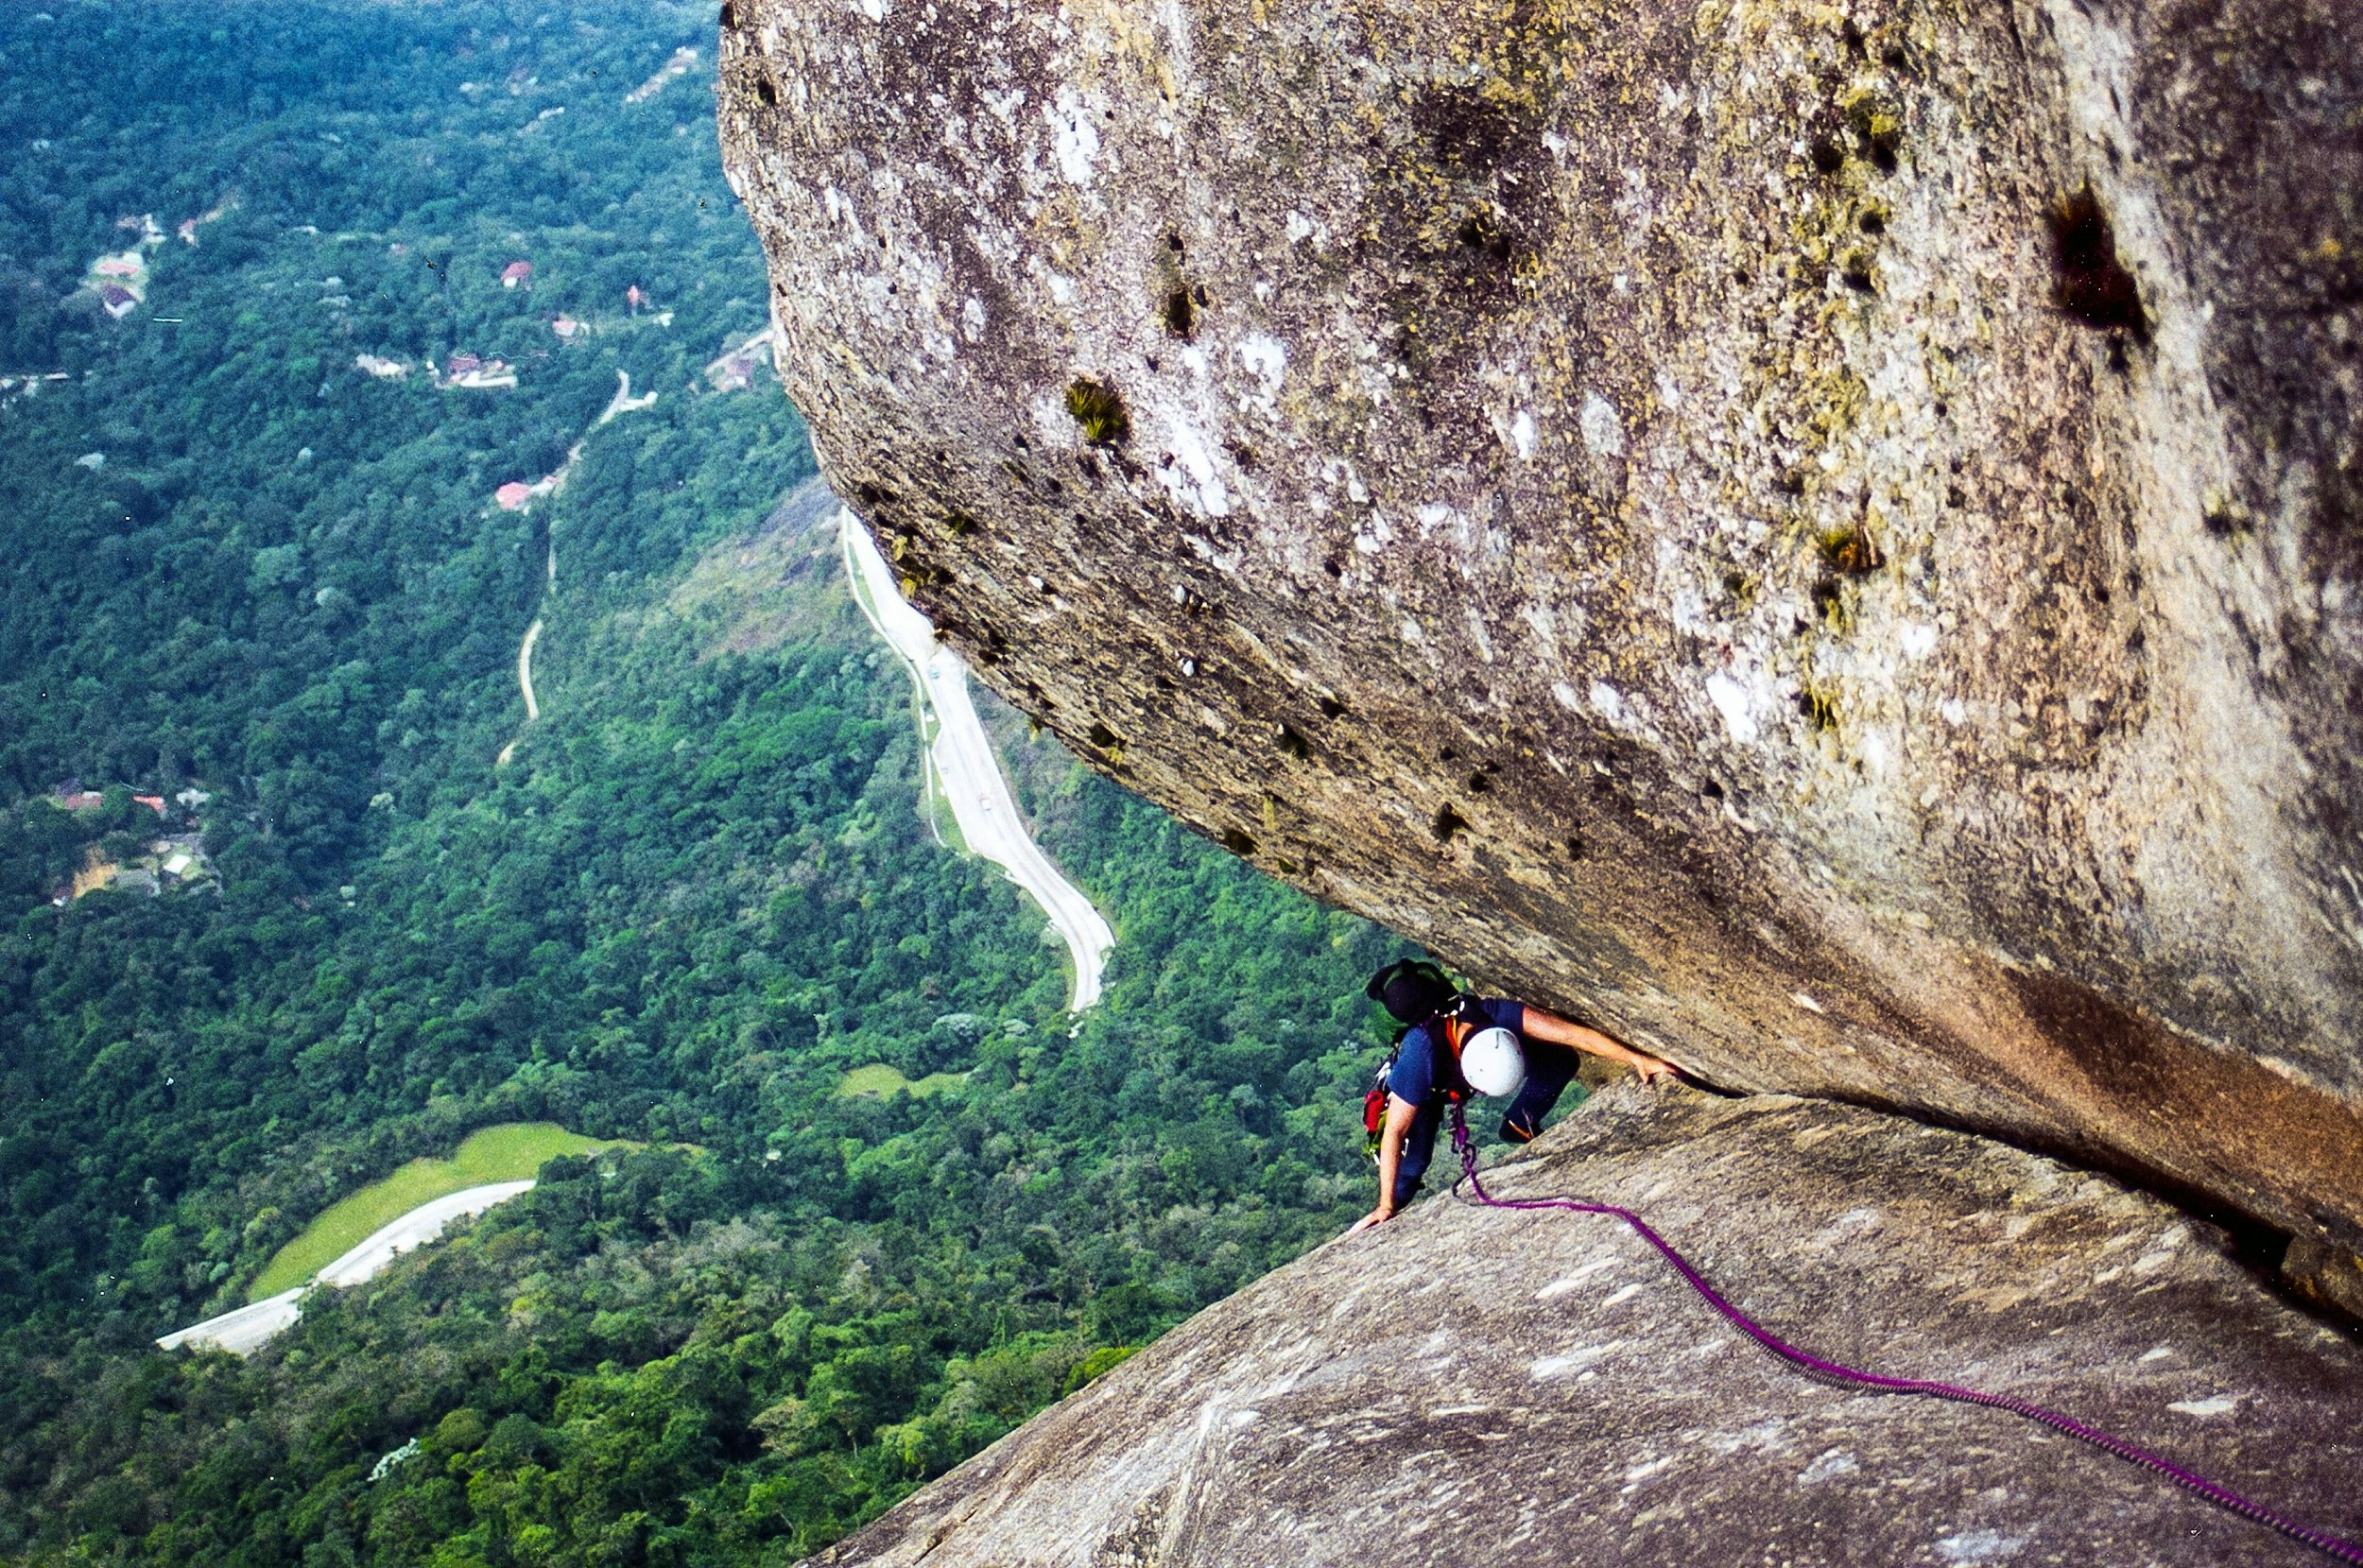 A rock climber ascends a vertical crack between the junction of two massive monoliths; far below in the distance is a forest.